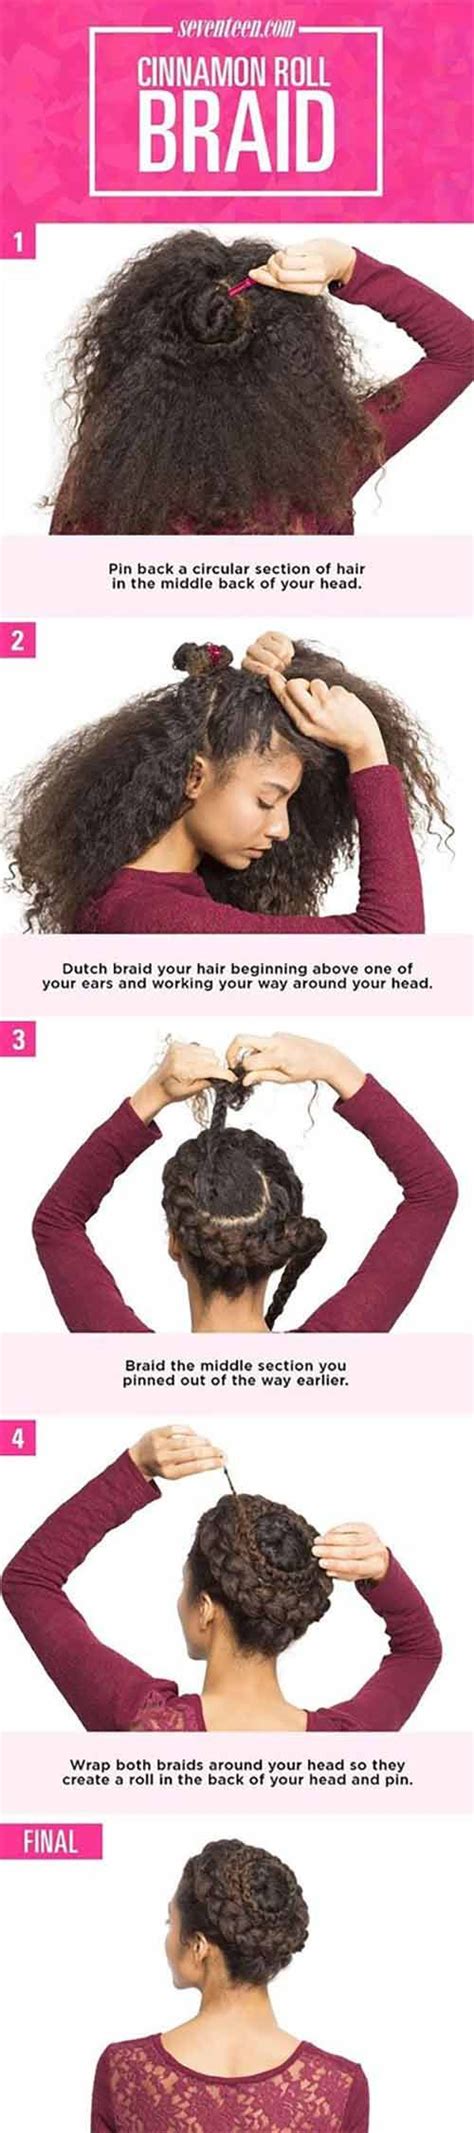 26 incredibly stunning diy updos for curly hair curly hair updo curly hair styles curly girl